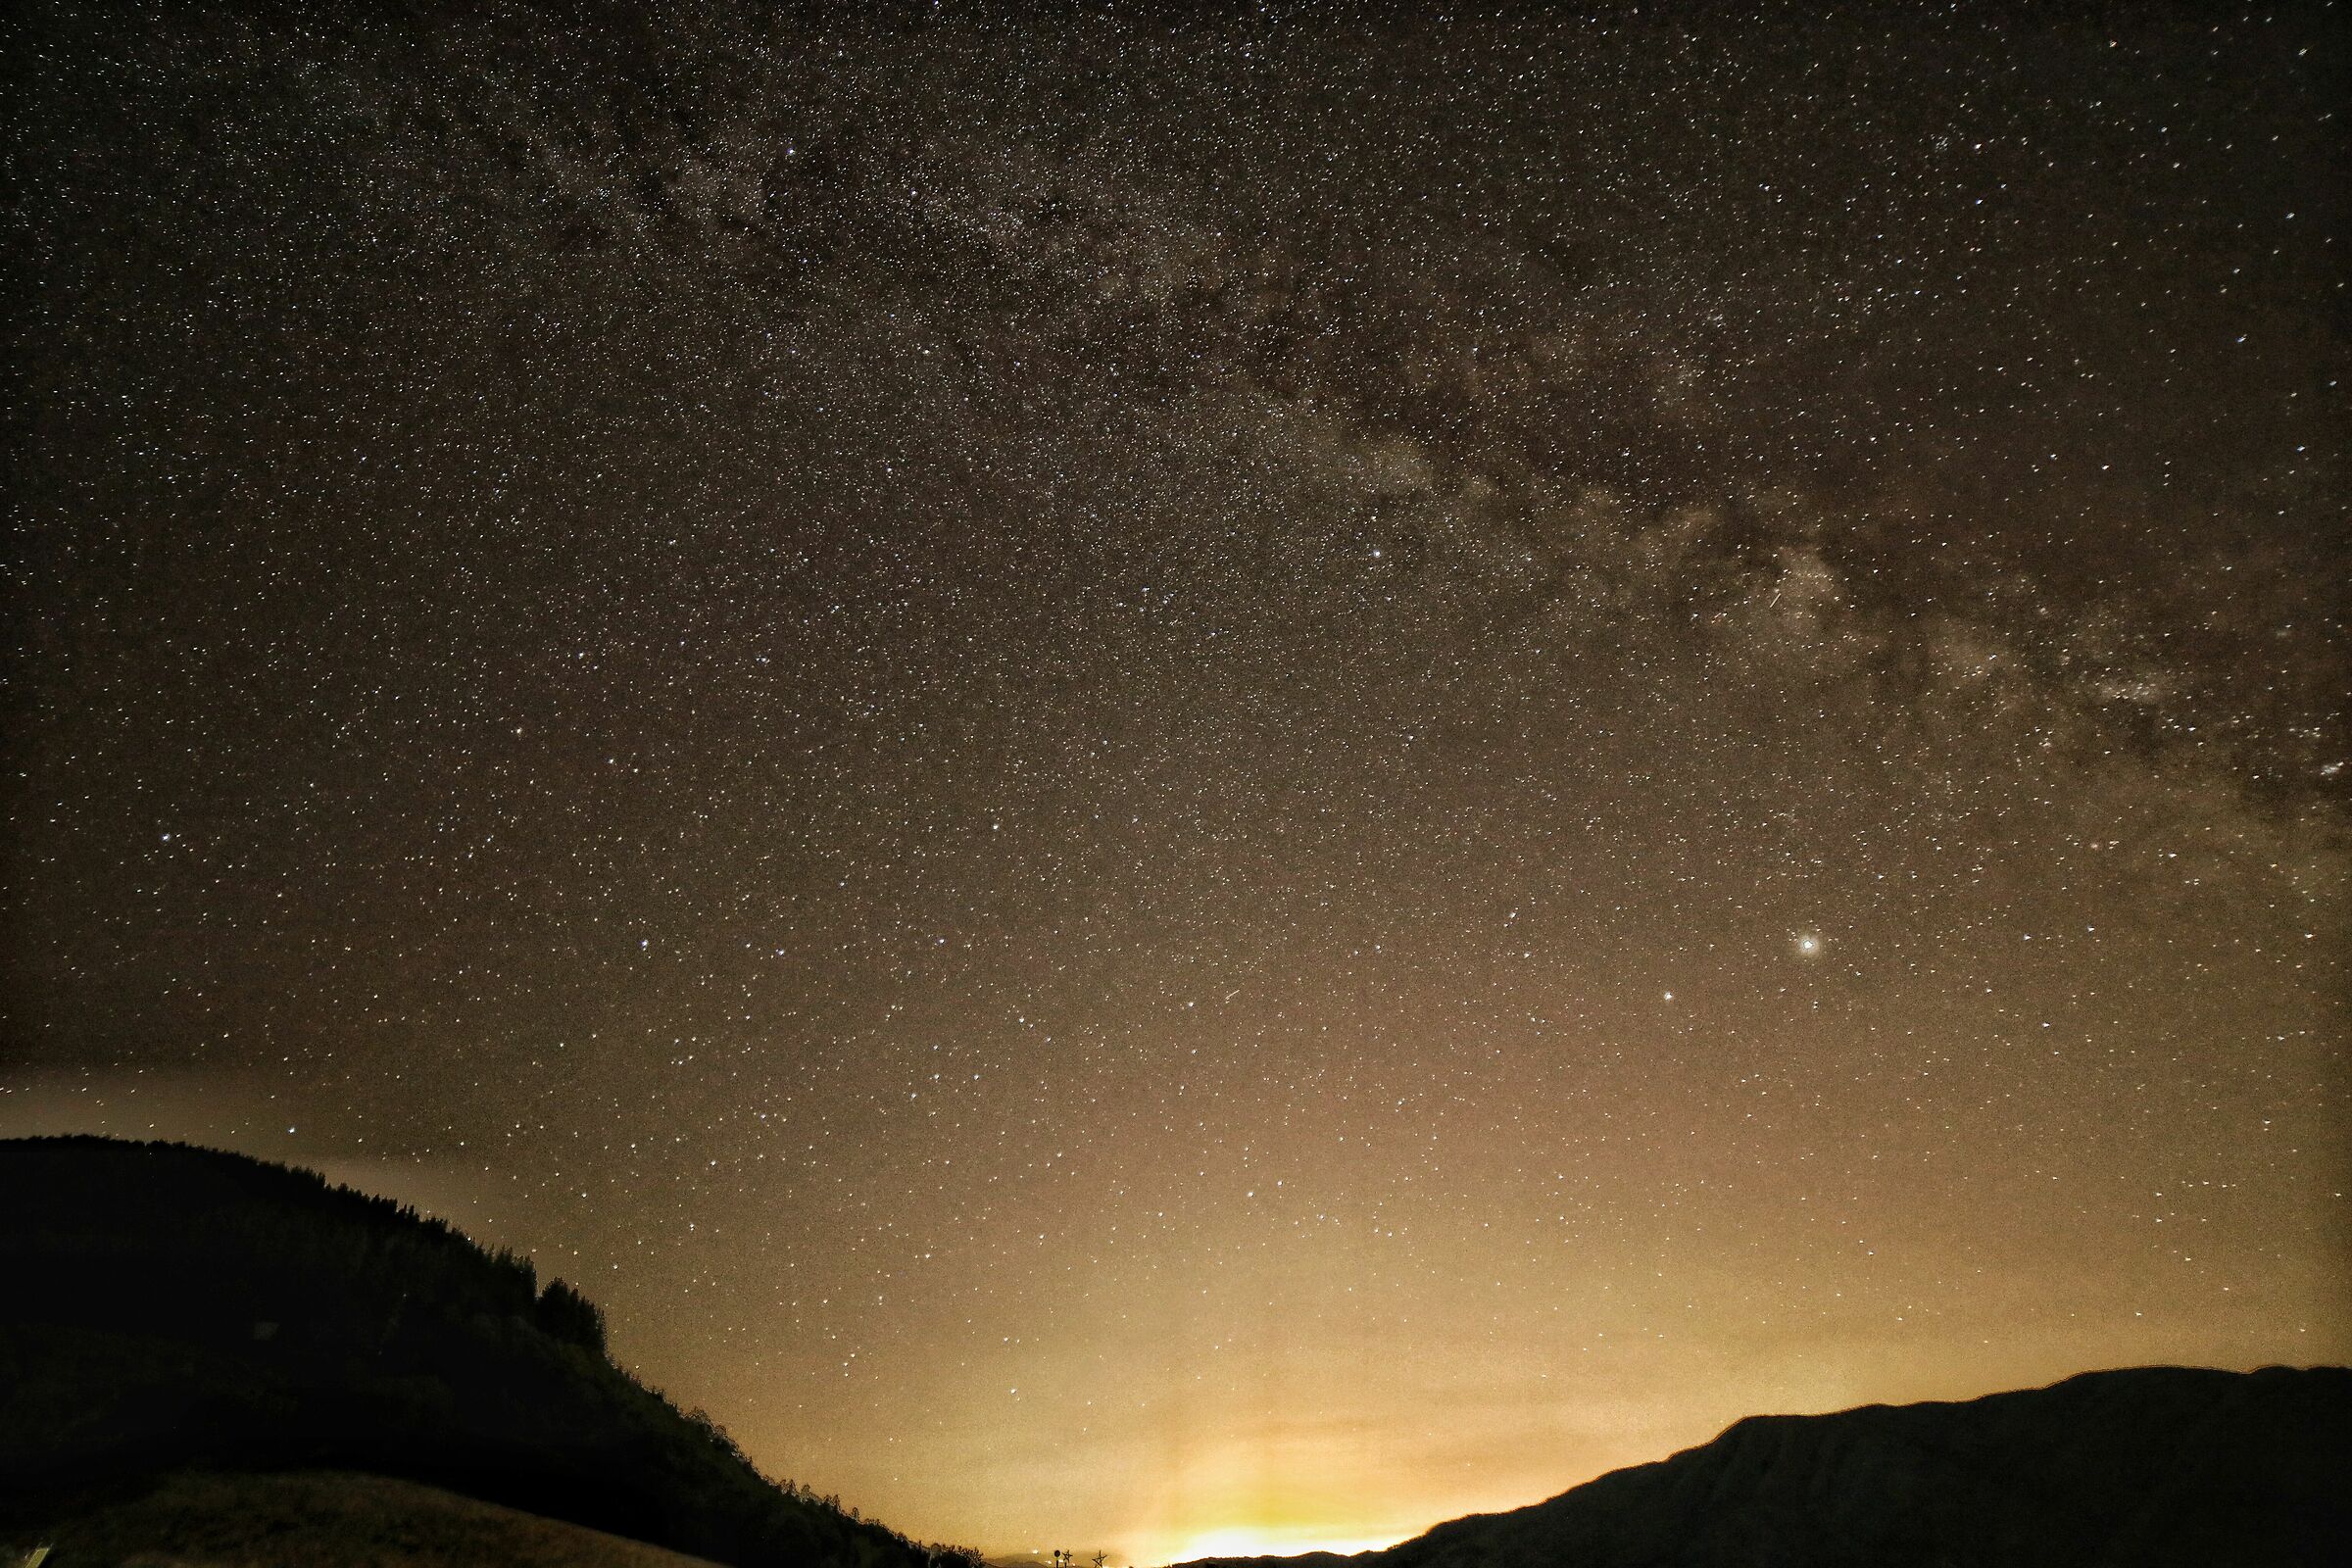 St. Marcello Pistoiese and the Milky Way...